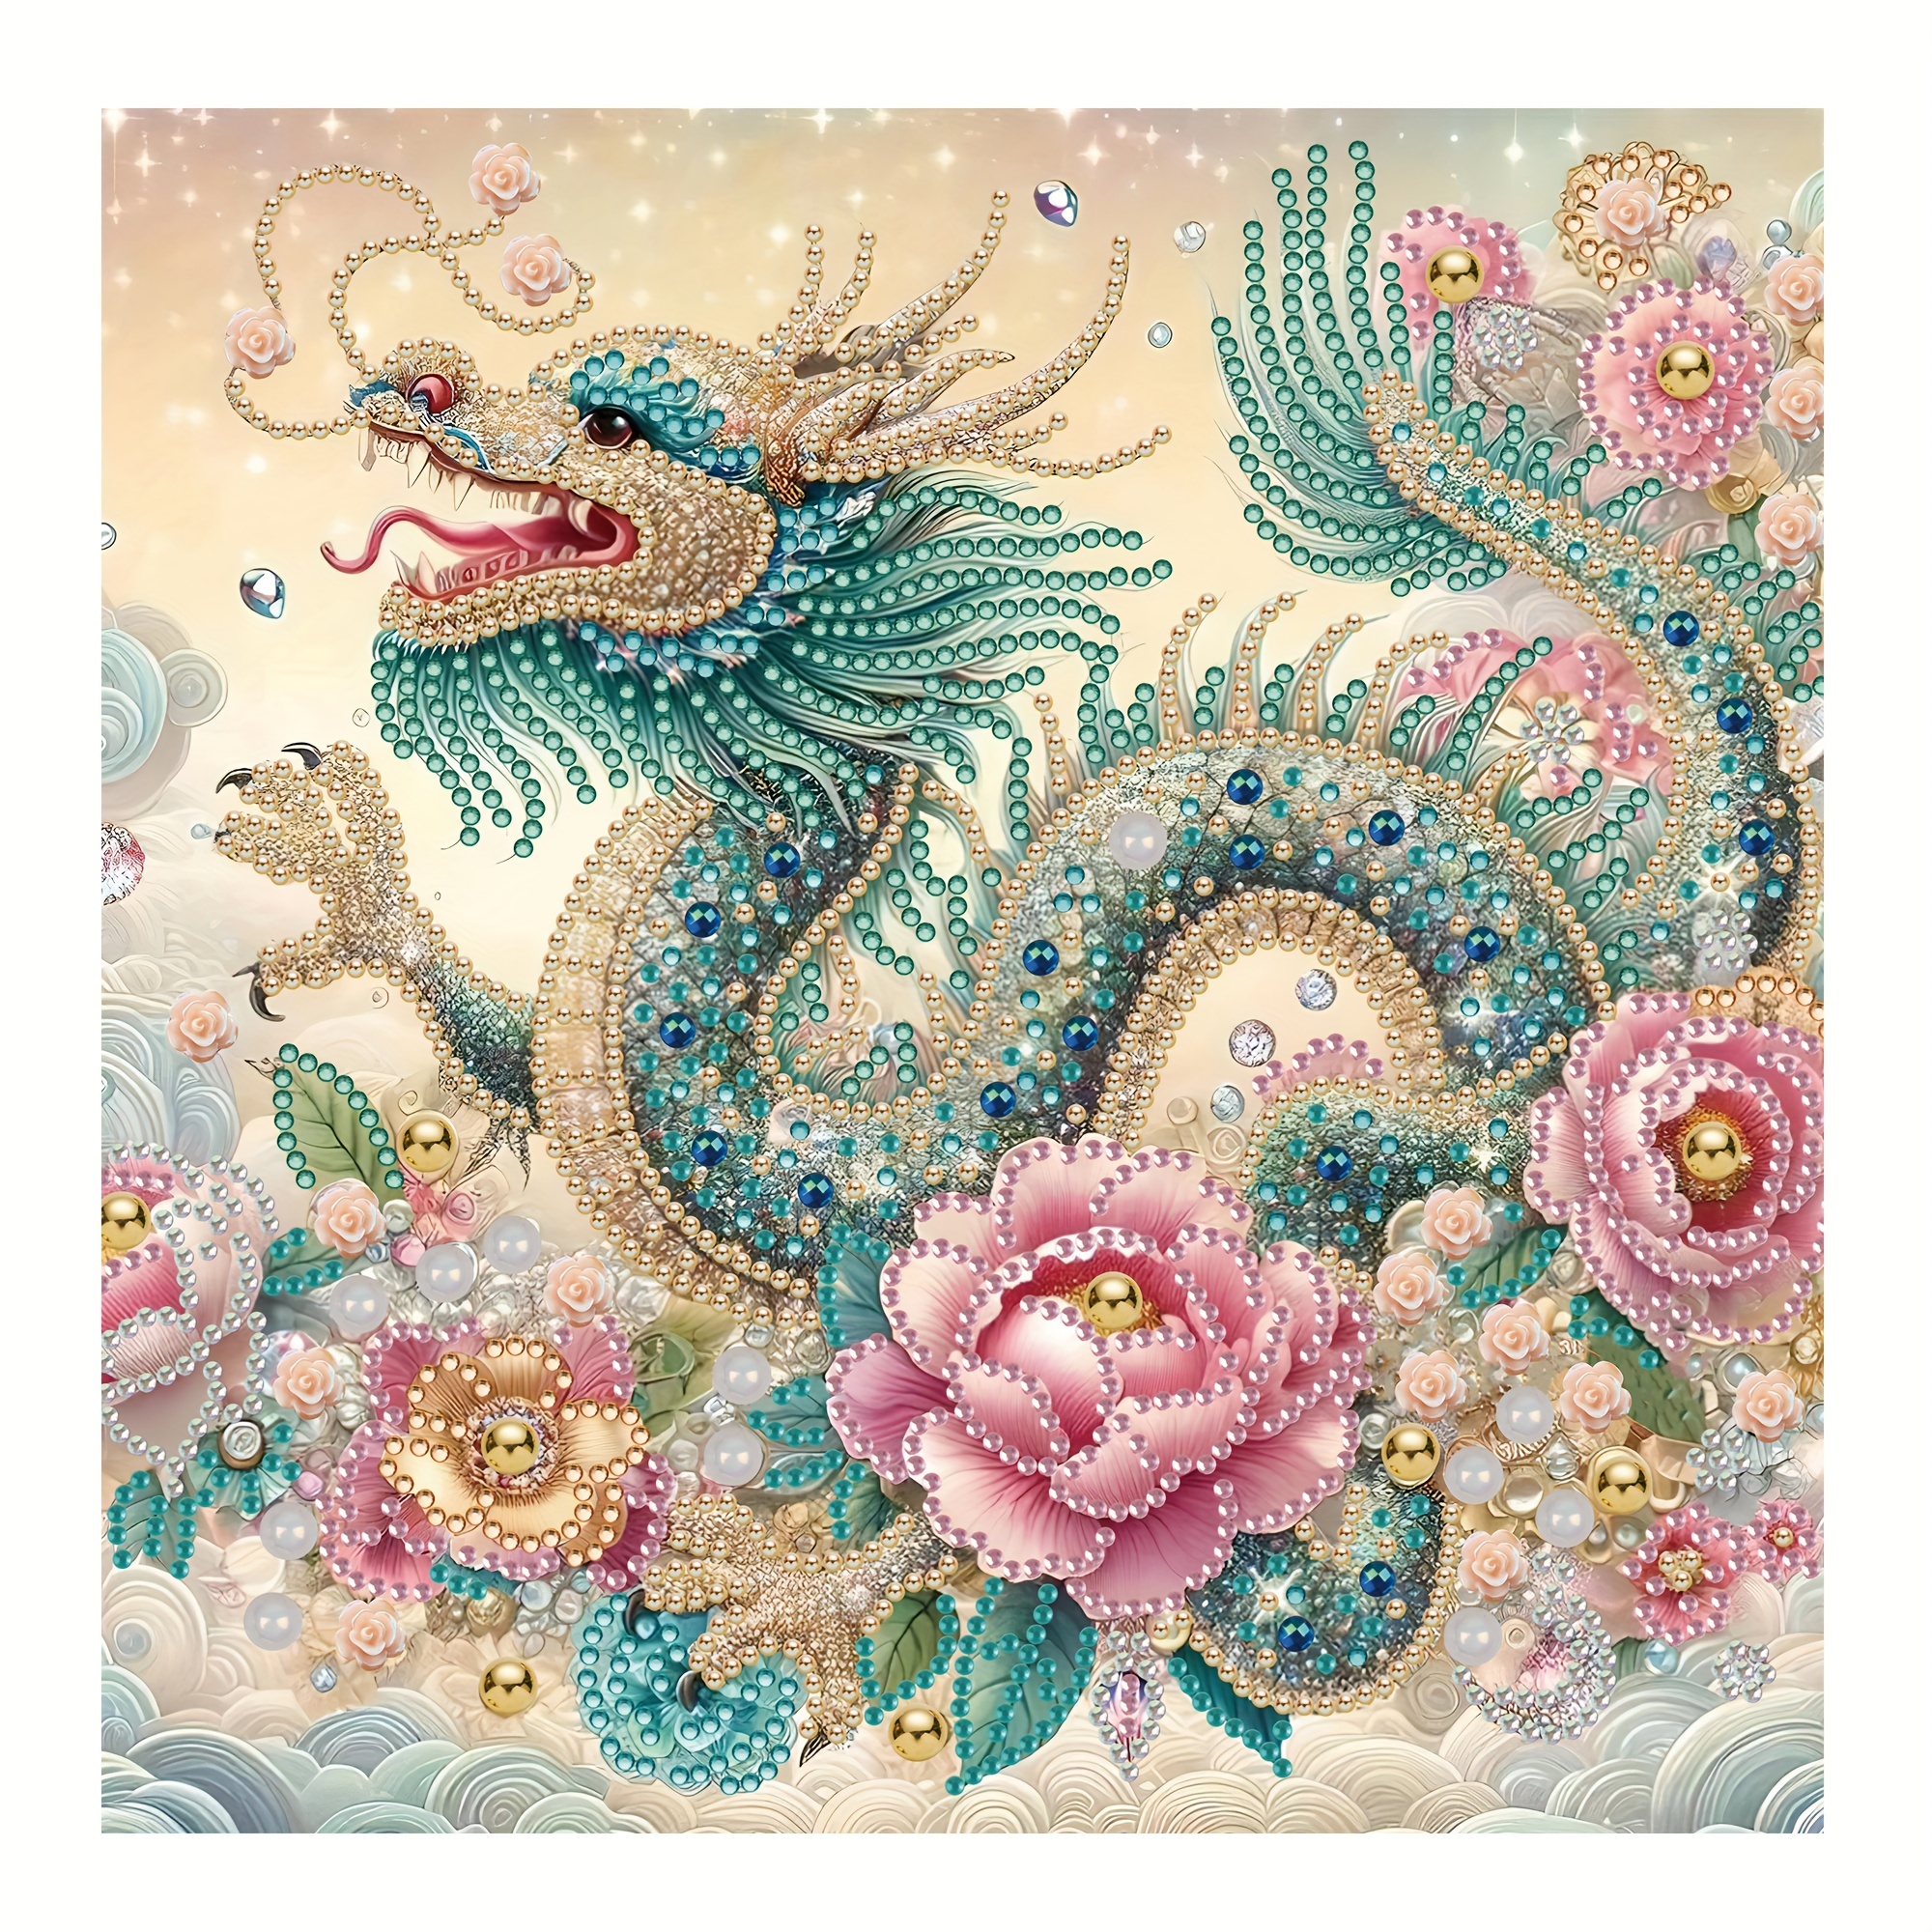 

Cartoon Blue Dragon 5d Diy Diamond Painting Kit, Special Shaped Crystal Rhinestone Partial Drill Mosaic Art, Frameless Wall Decor For Home And Office